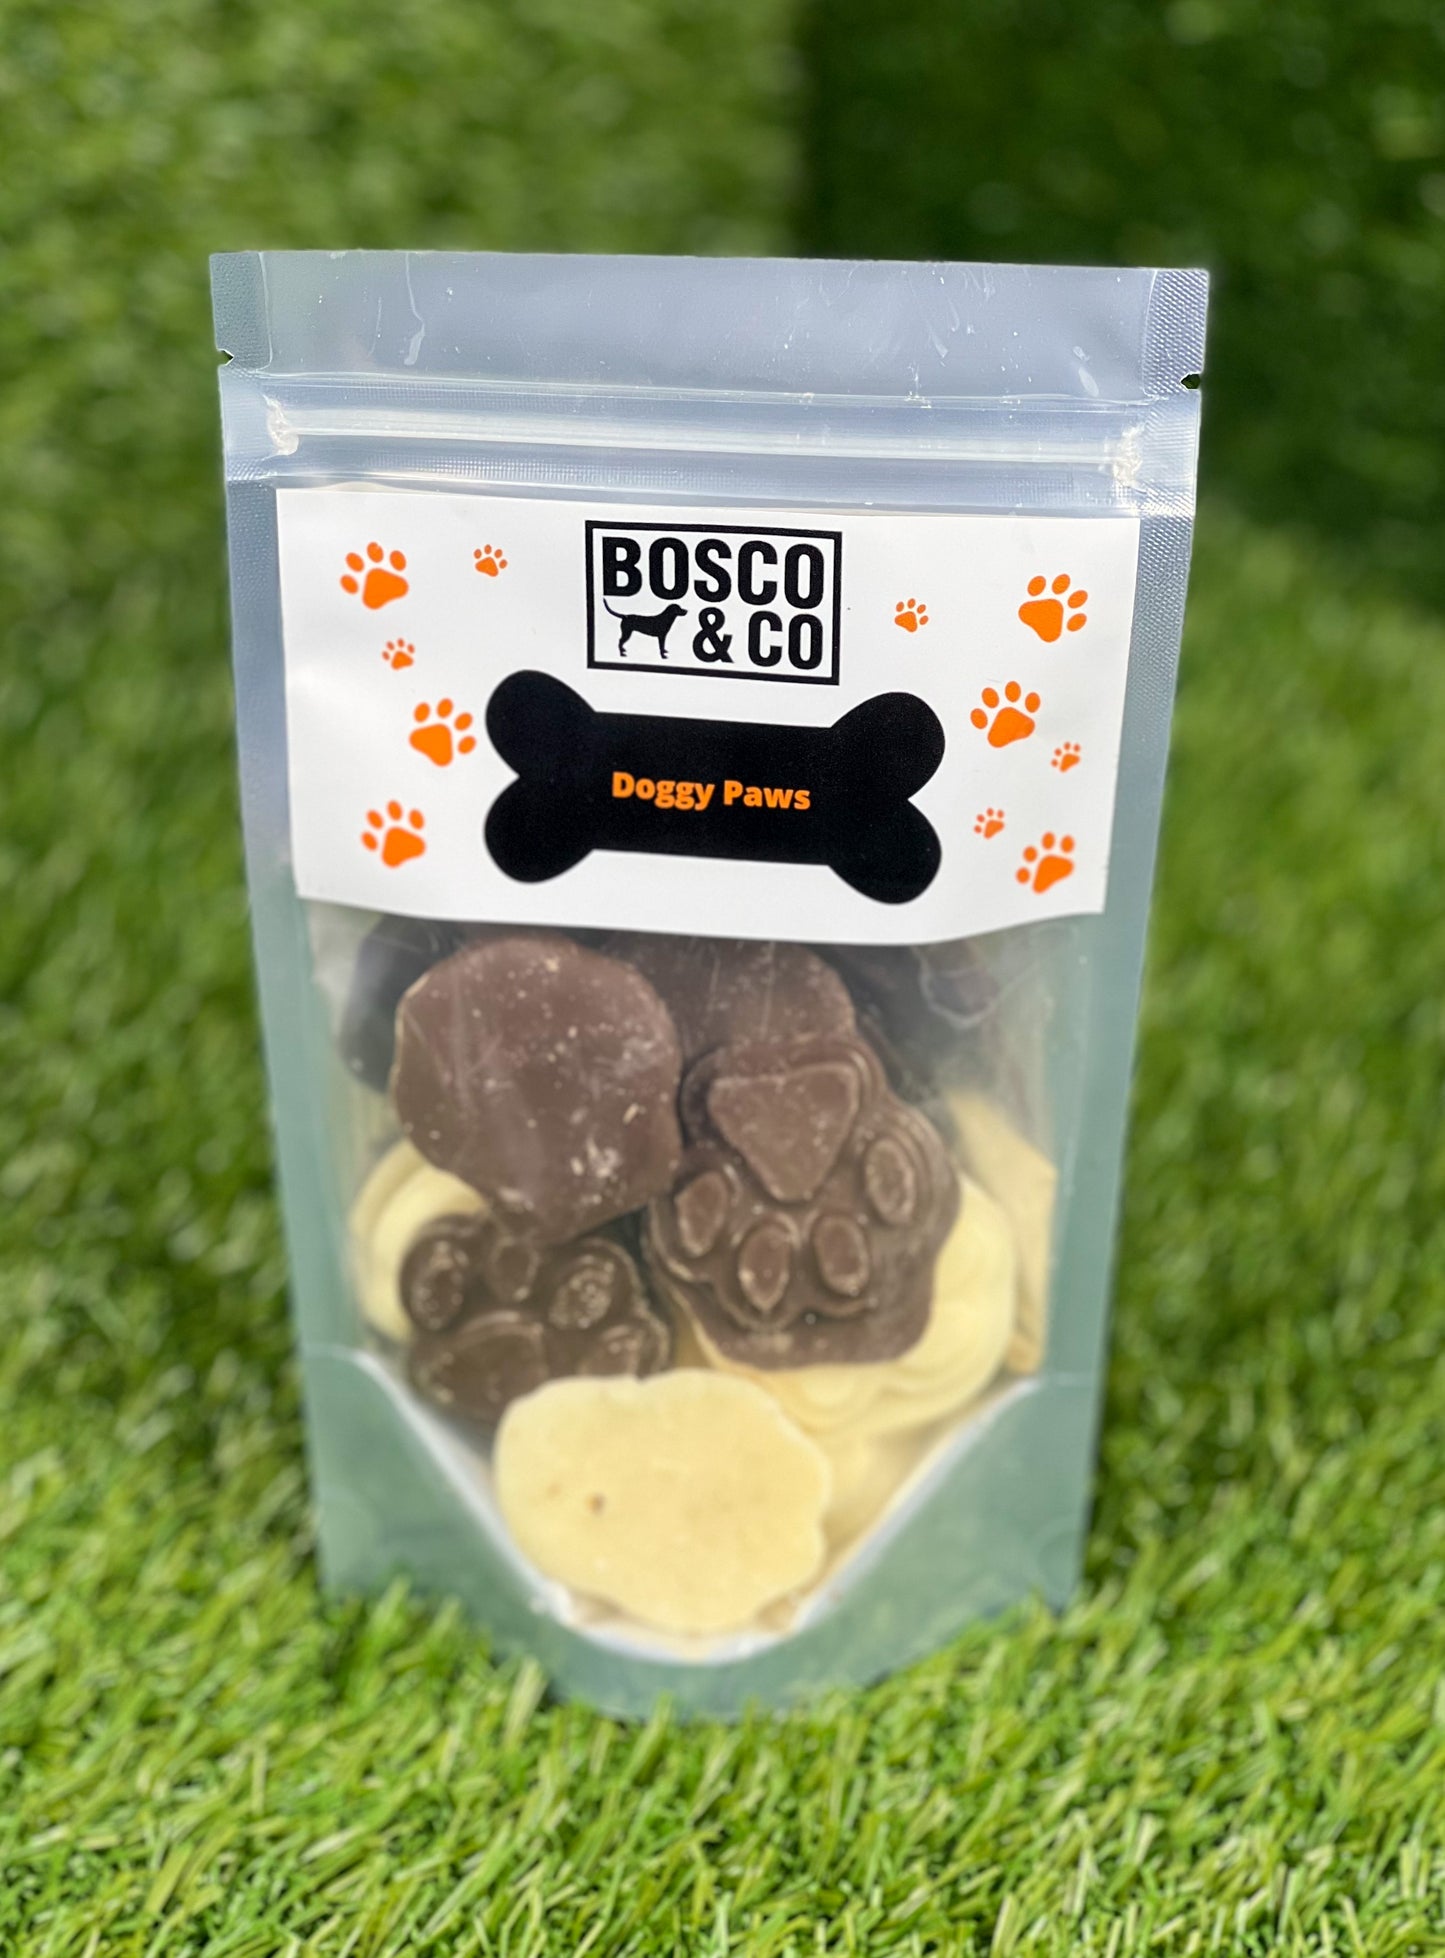 DOGGY PAWS new packaging